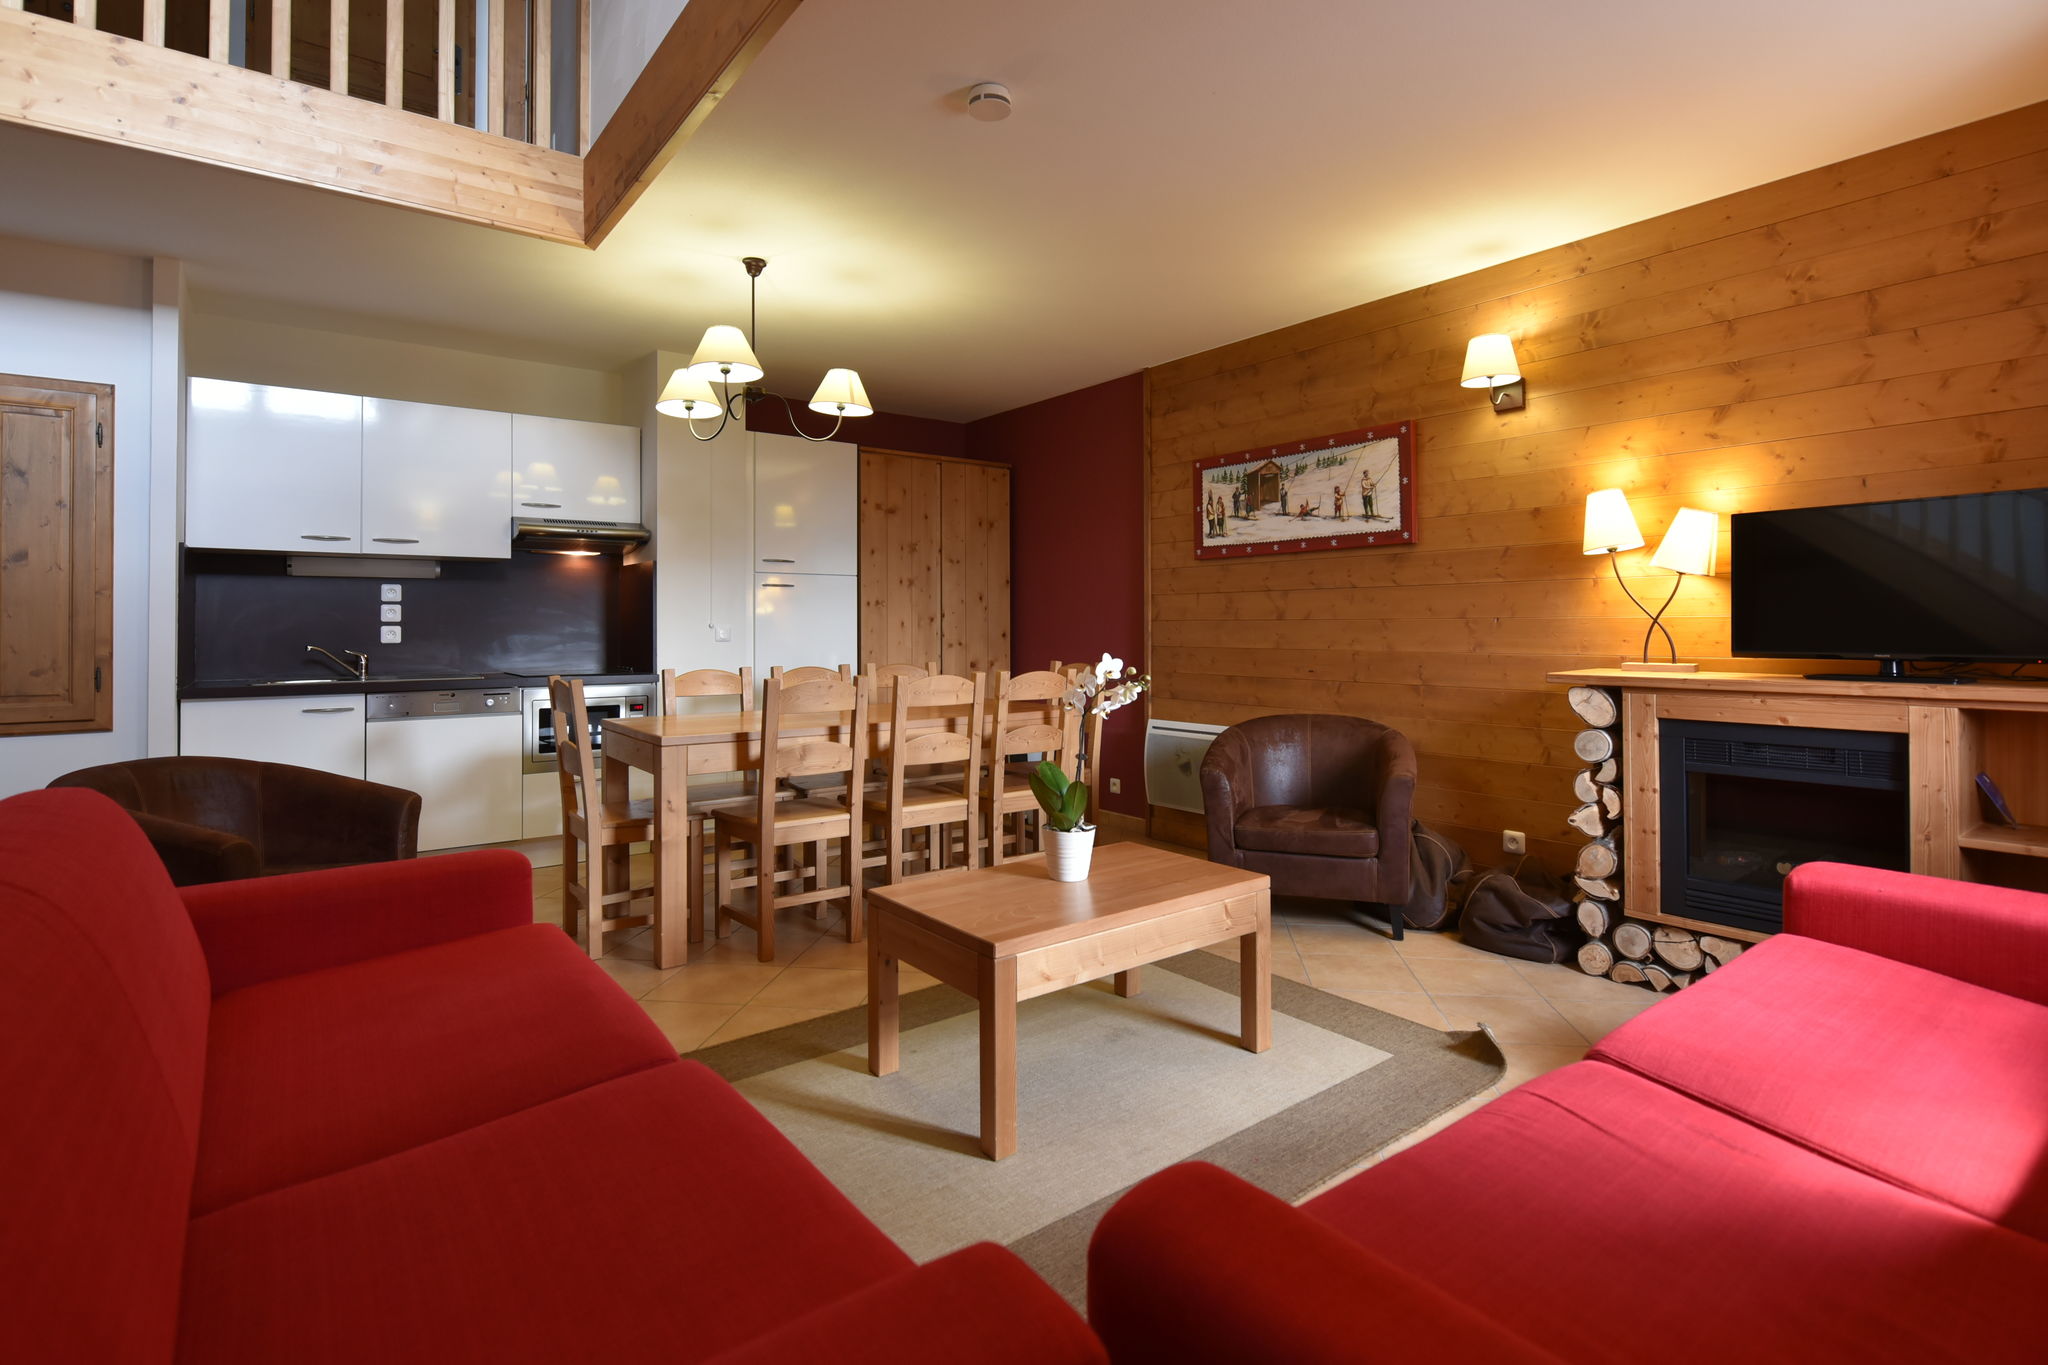 Modern apartment near the ski lift in an authentic village